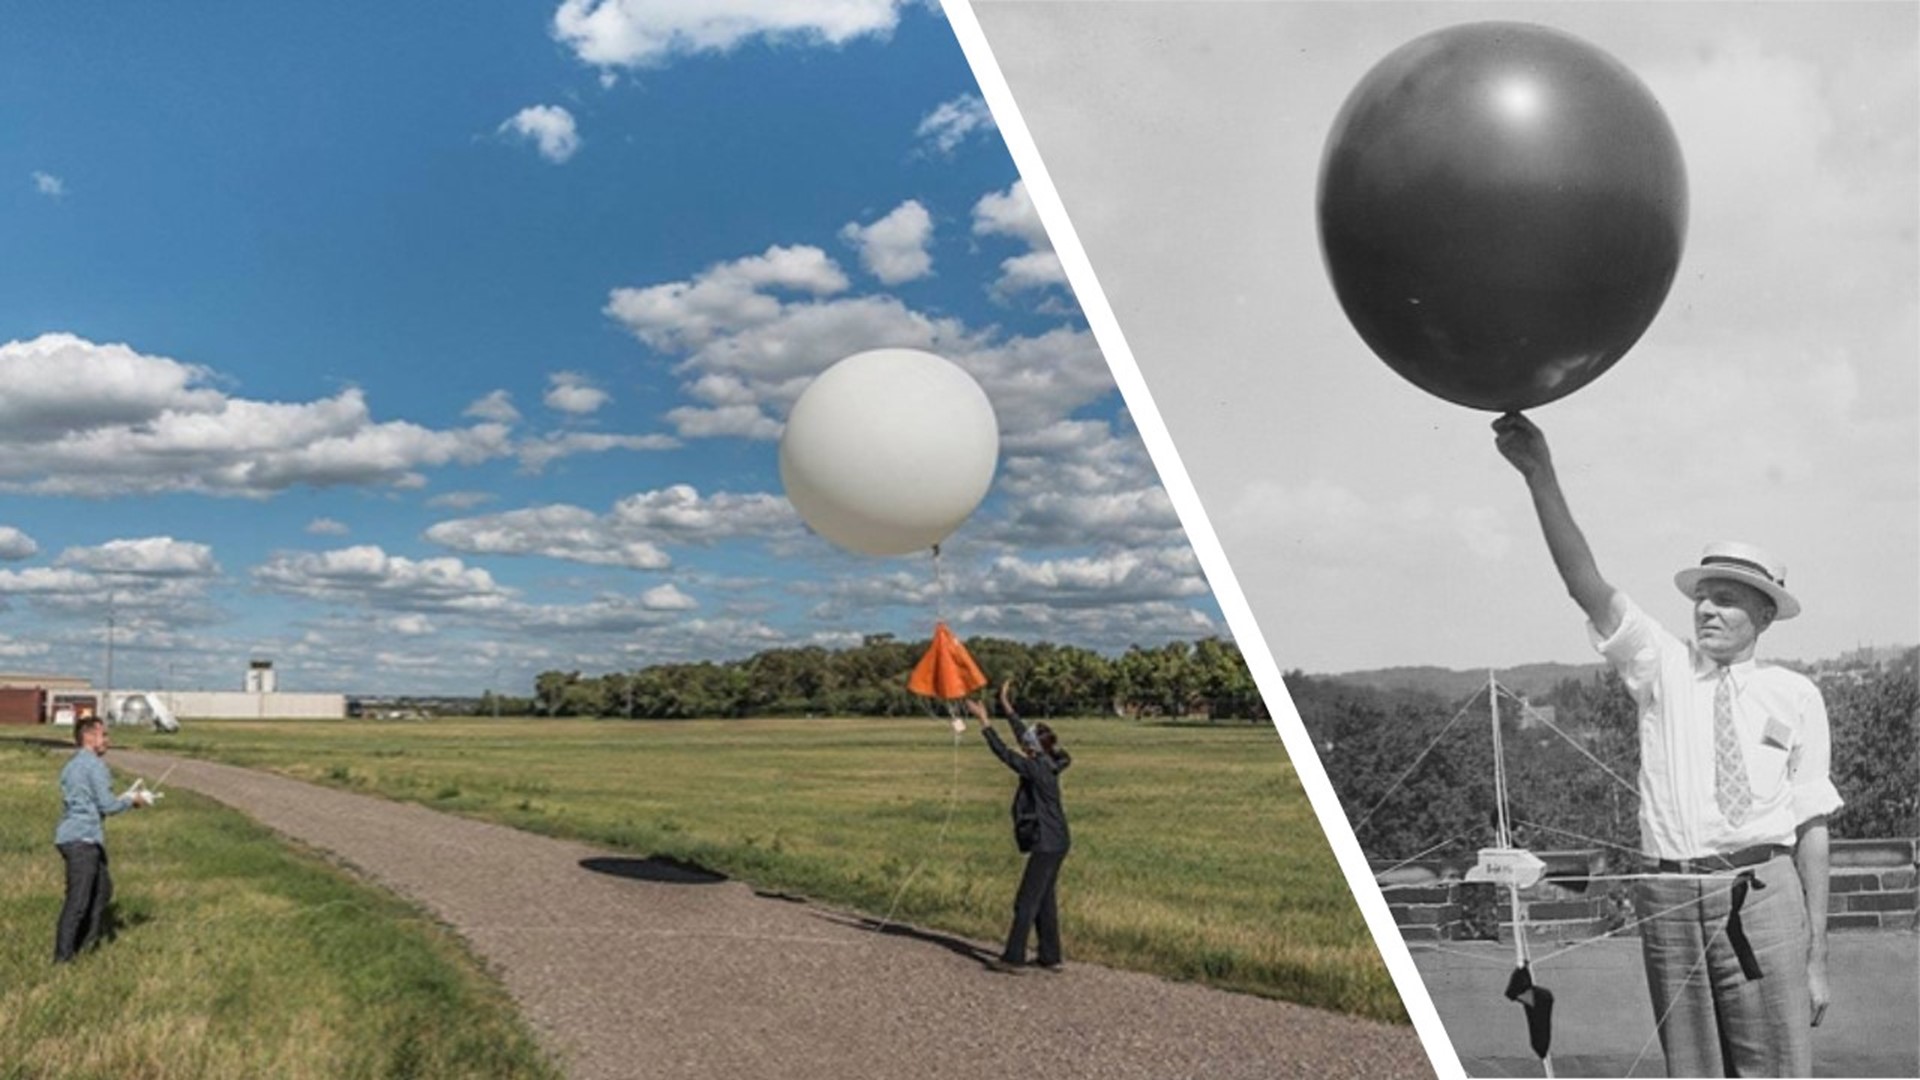 Weather balloons are important for forecasters to understand the atmosphere, and the ballons are critical for accurate forecasts.